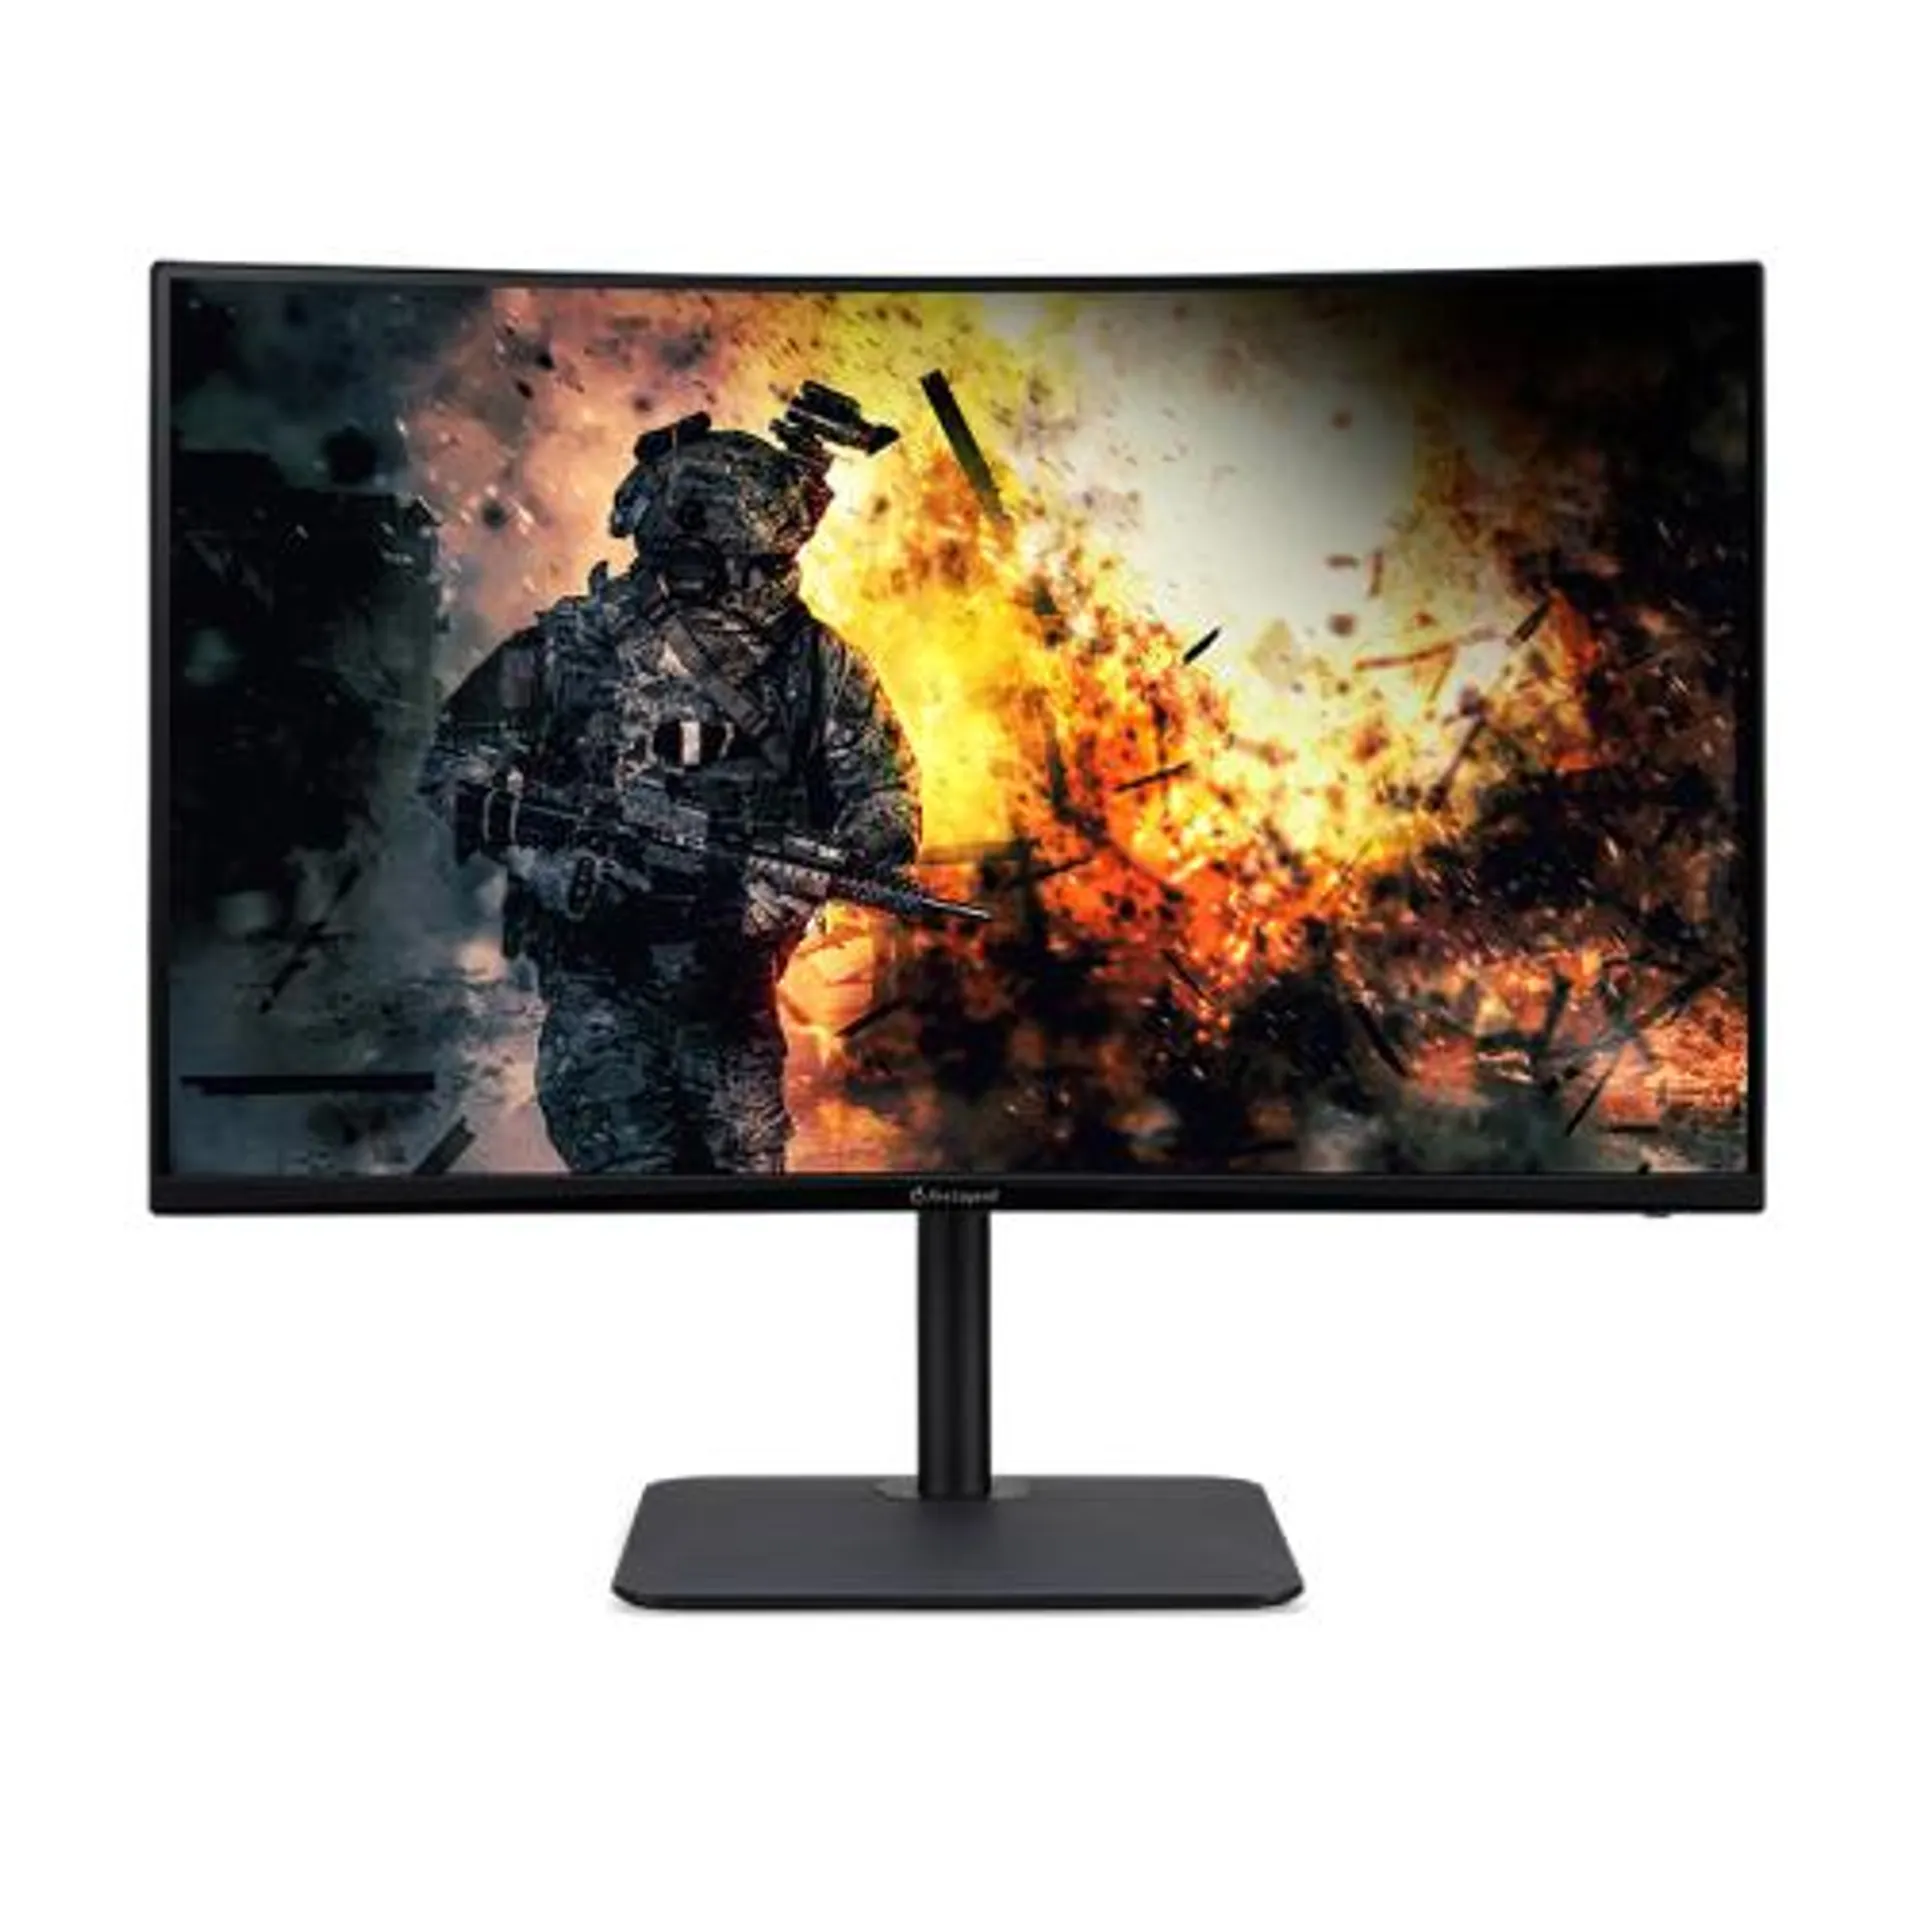 32" AOPEN Gaming Monitor - 32HC5QR ZBMIIPRX